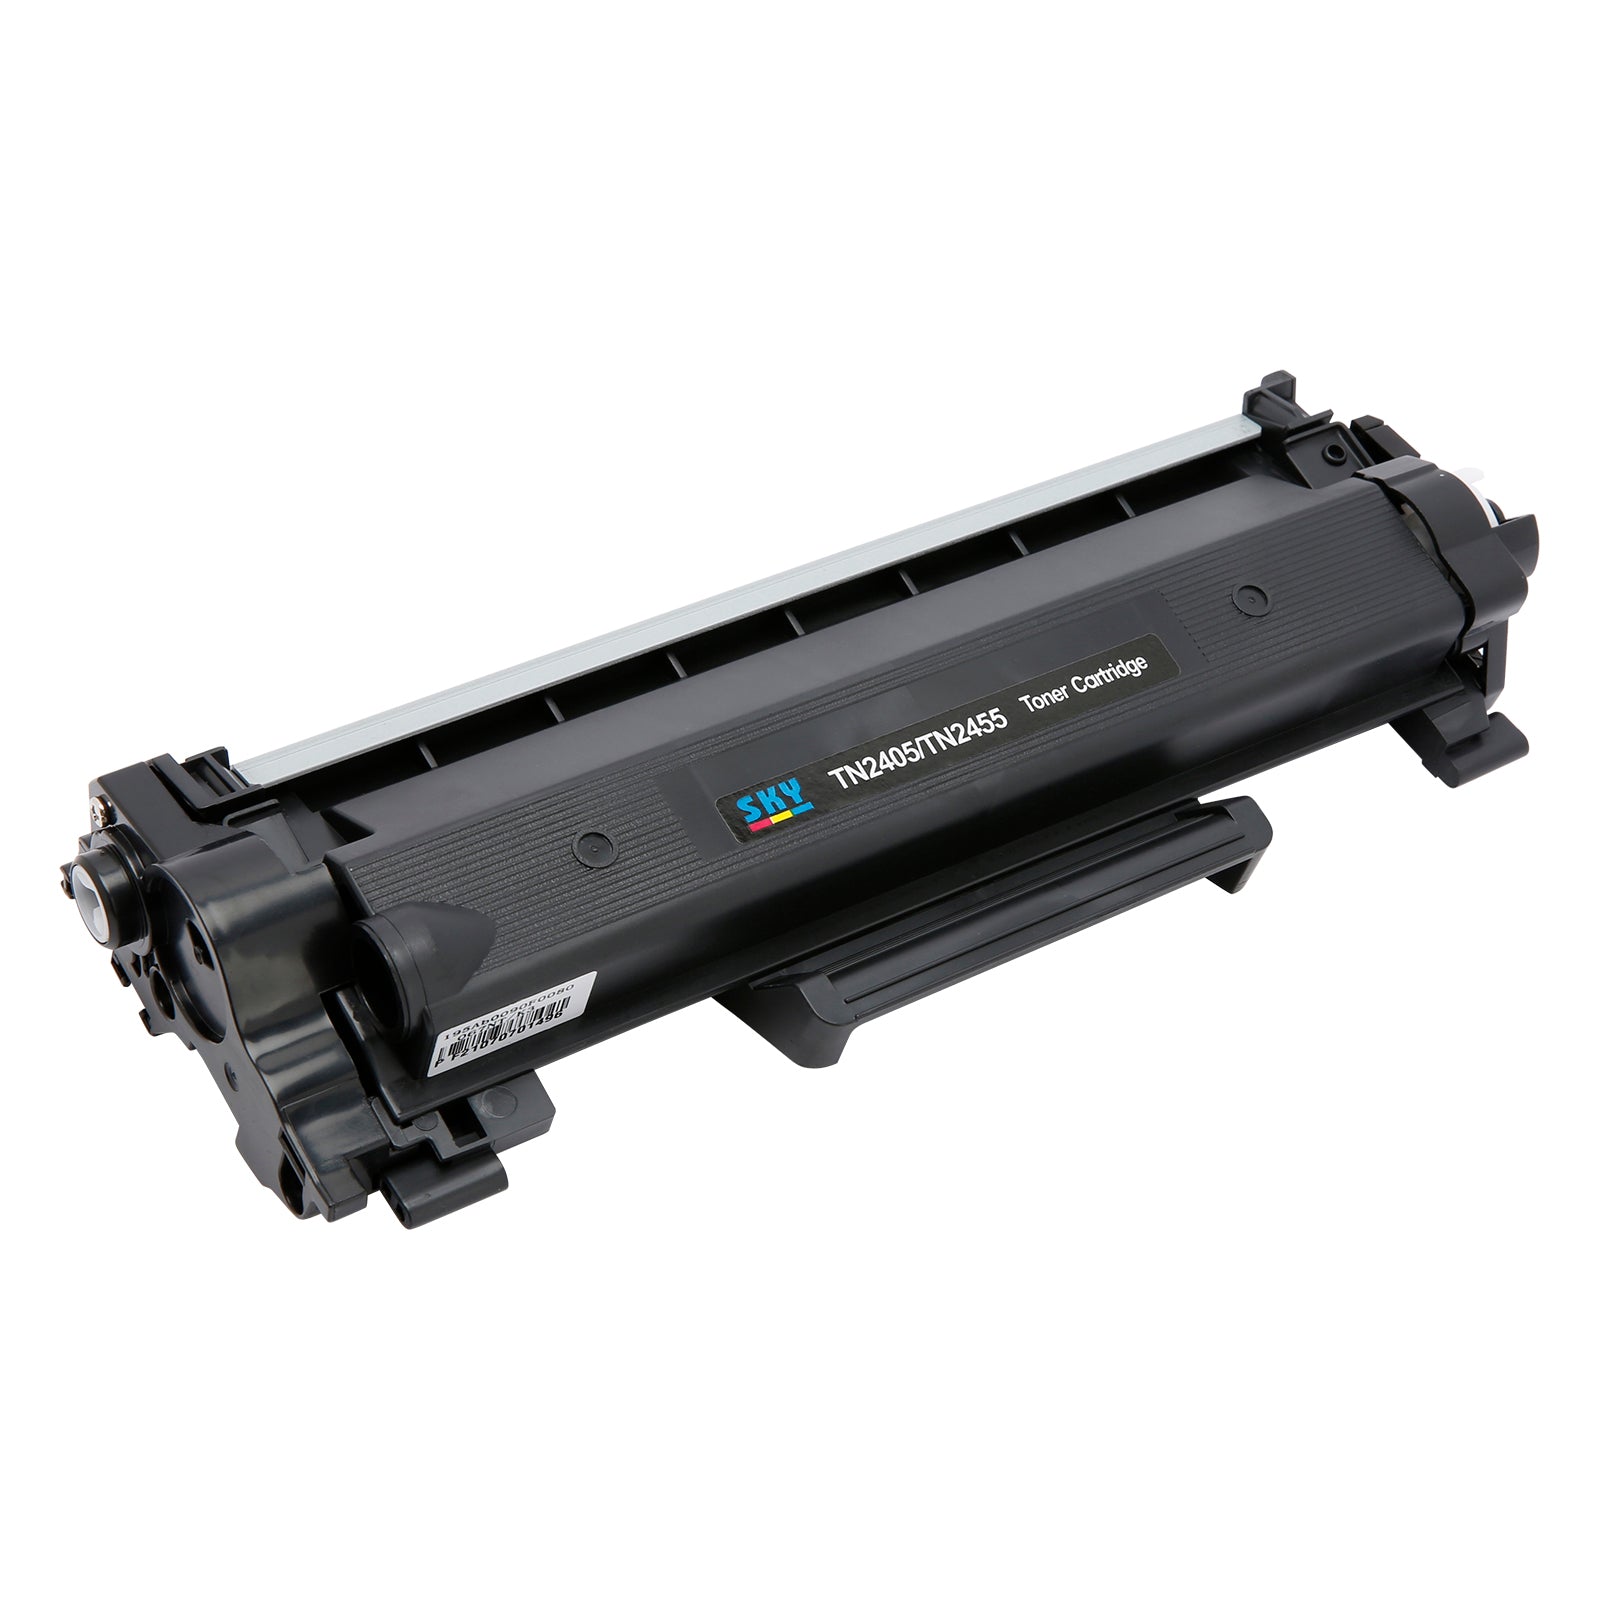 SKY TN-2455 Toner Cartridge for Brother  HL-2335D, L2370DN  DCP-L2535D and DCP-L2550DW - 3000 pages